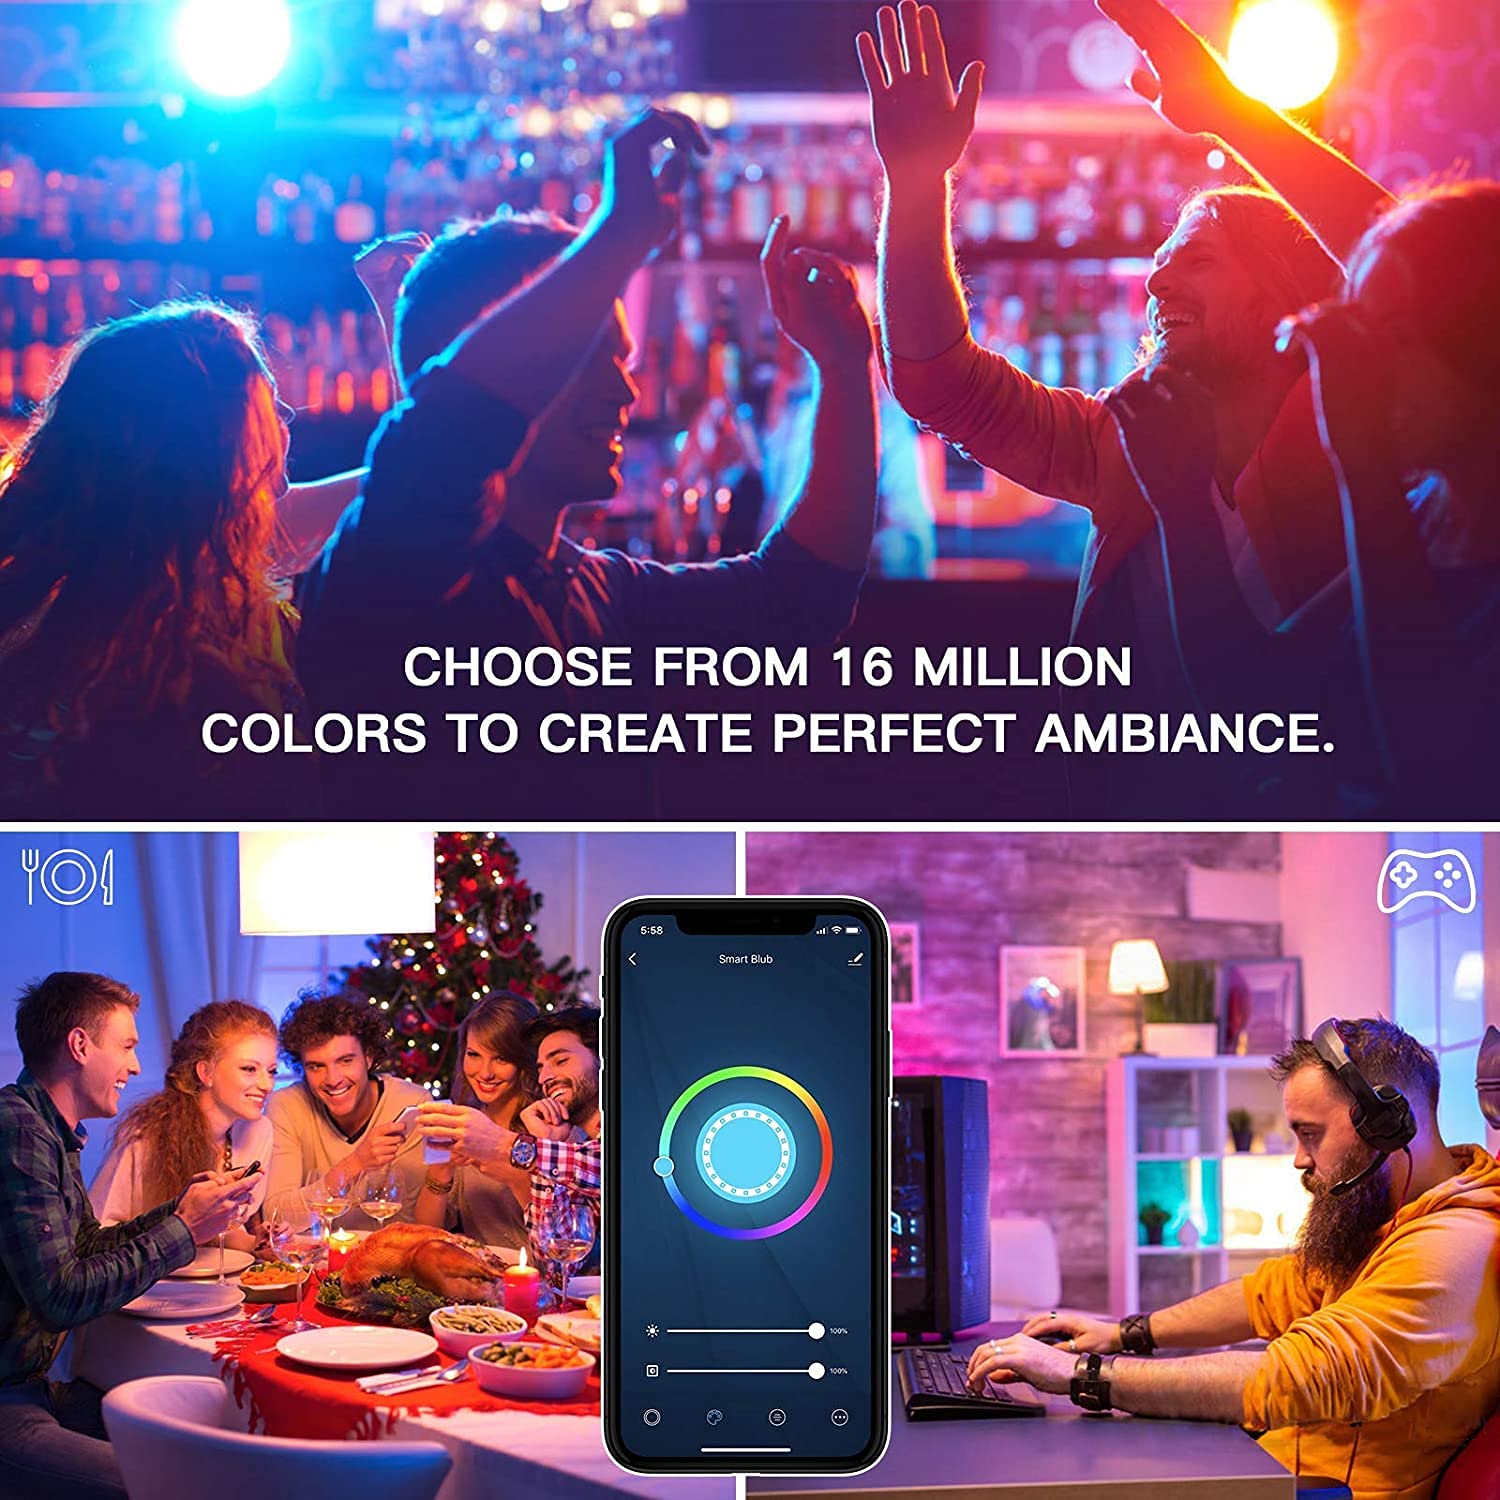 TREATLIFE Smart Light Bulbs 4 Pack, 2.4GHz Music Sync Color Changing Light Bulb, Works with Alexa Google Home, A19 E26 Dimmable LED Light Bulb 9W 800Lumen for Party Decoration, Smart Home, Multicolor